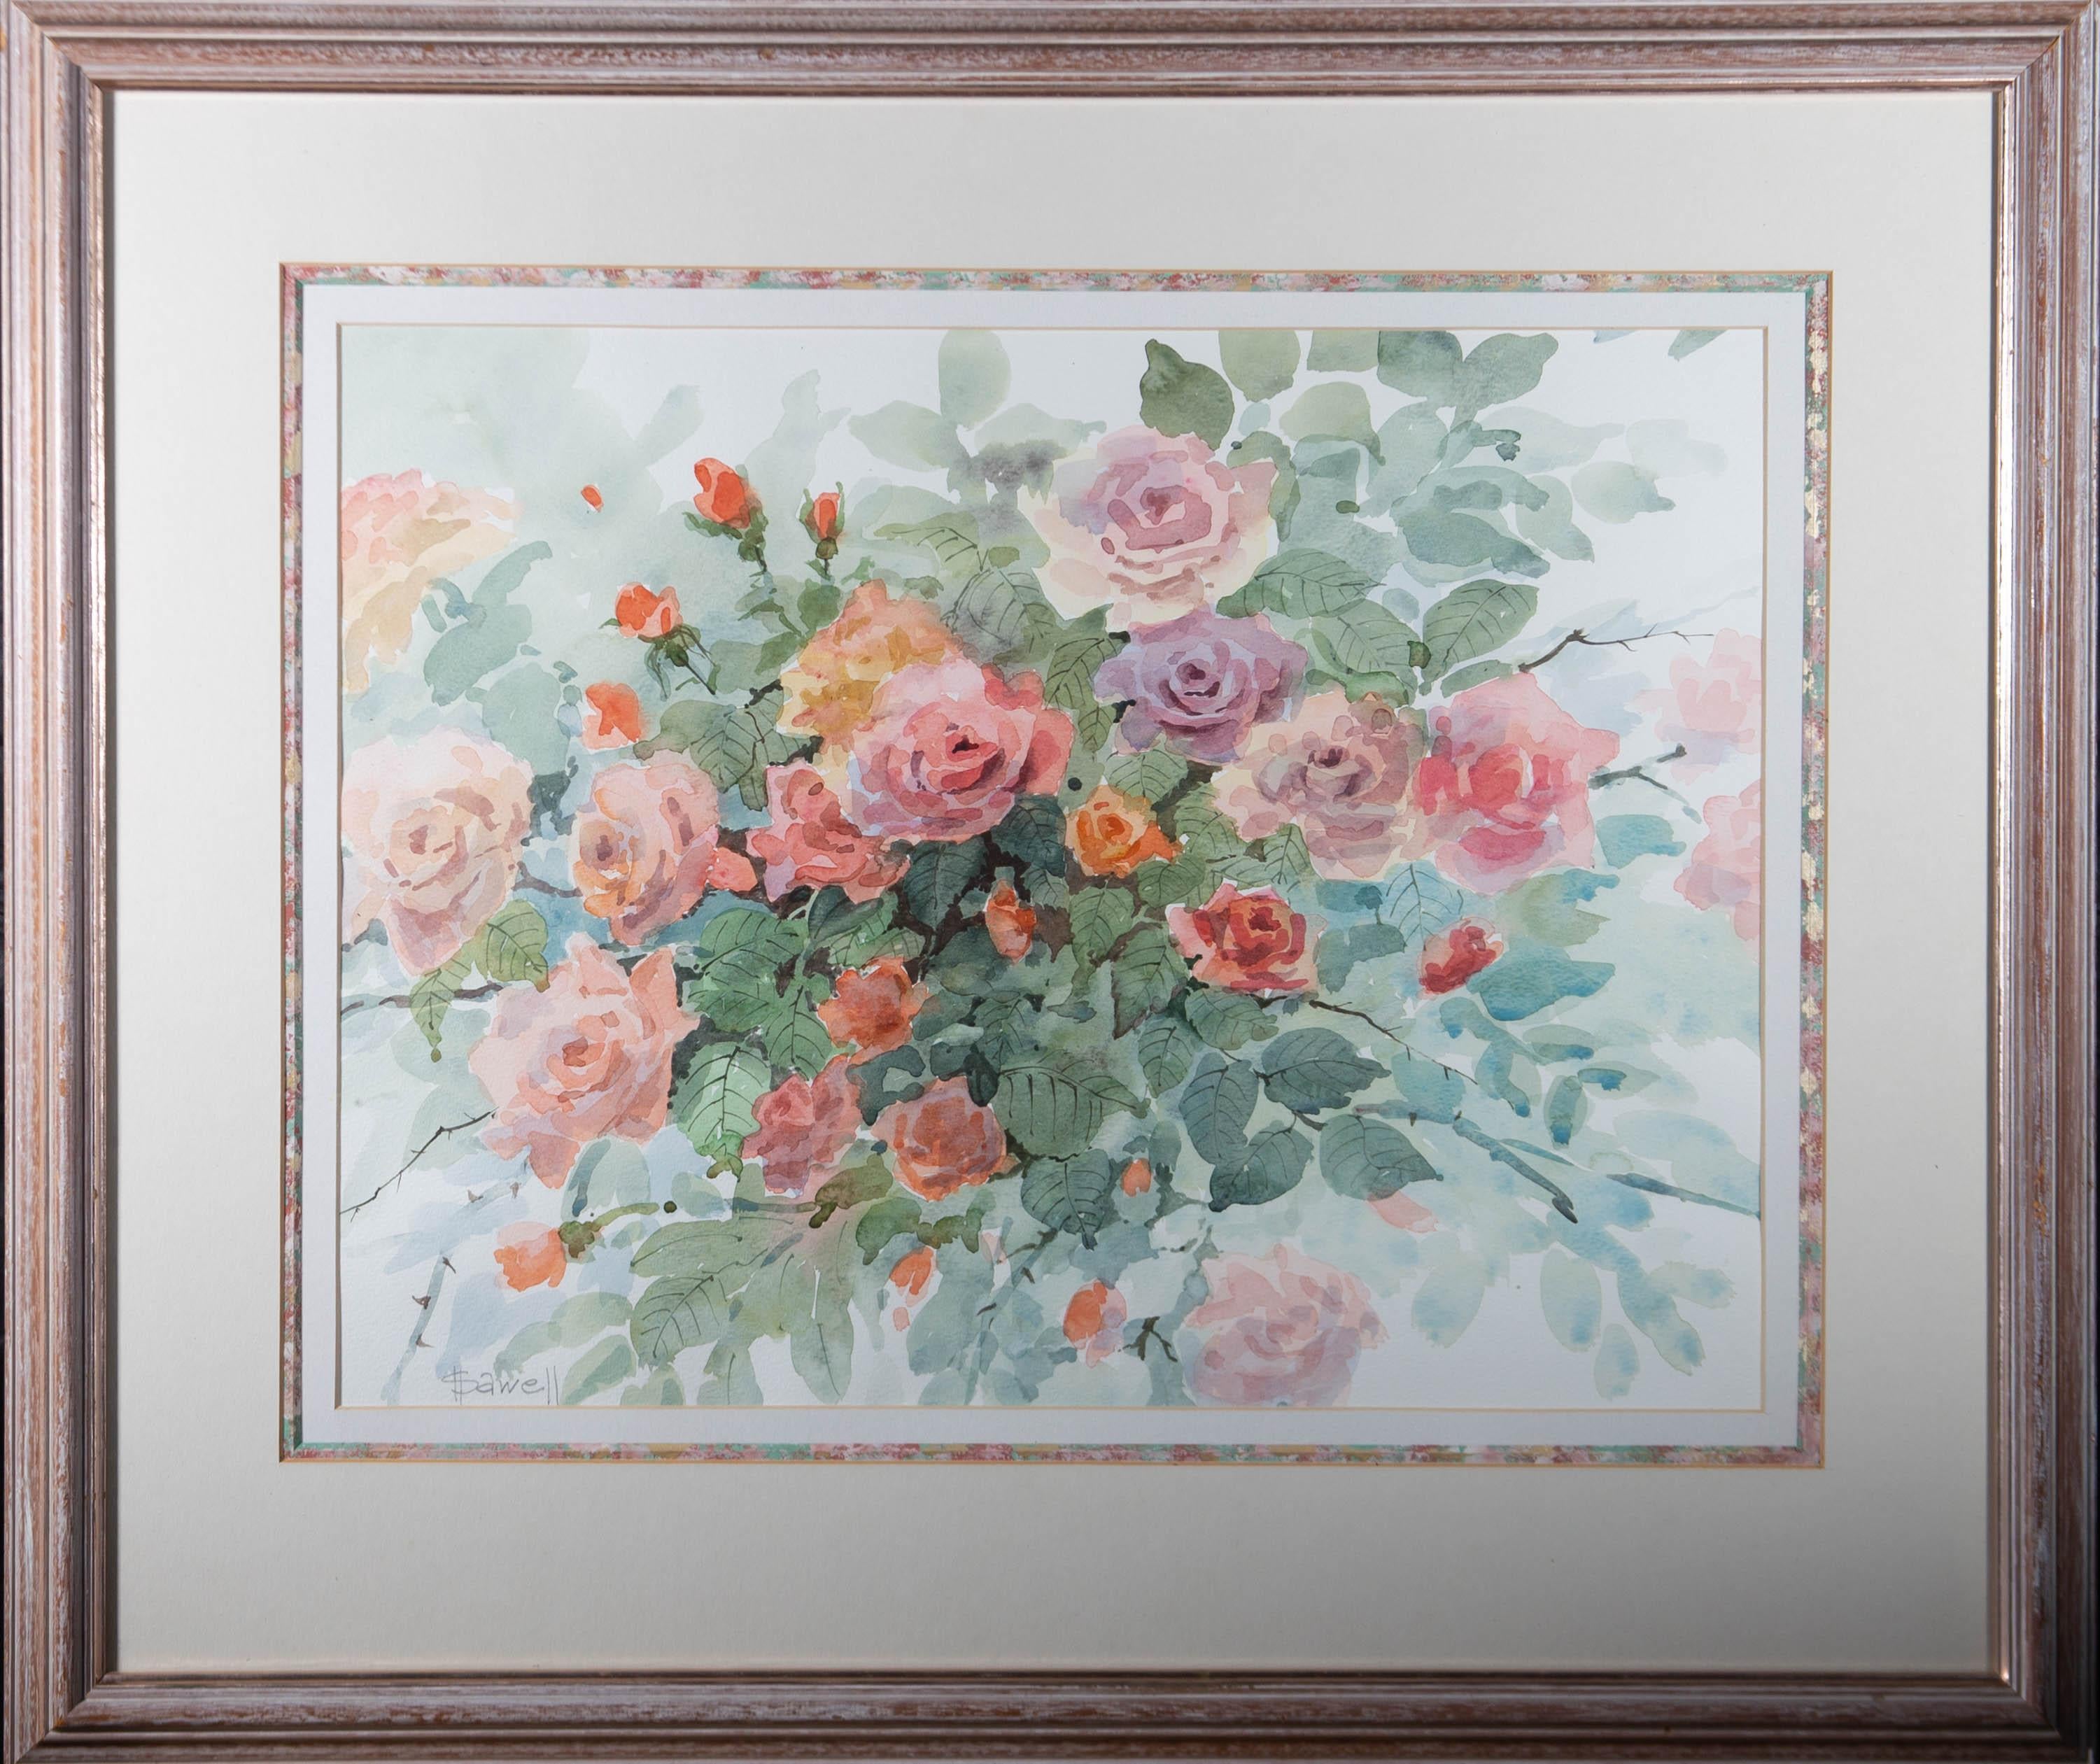 A charming watercolour painting by the artist Shirley Harrell, depicting a still life of roses. Signed to the lower left-hand corner. There is an artist's biography attached on the revere. Well-presented in a triple mount and in a limed wooden